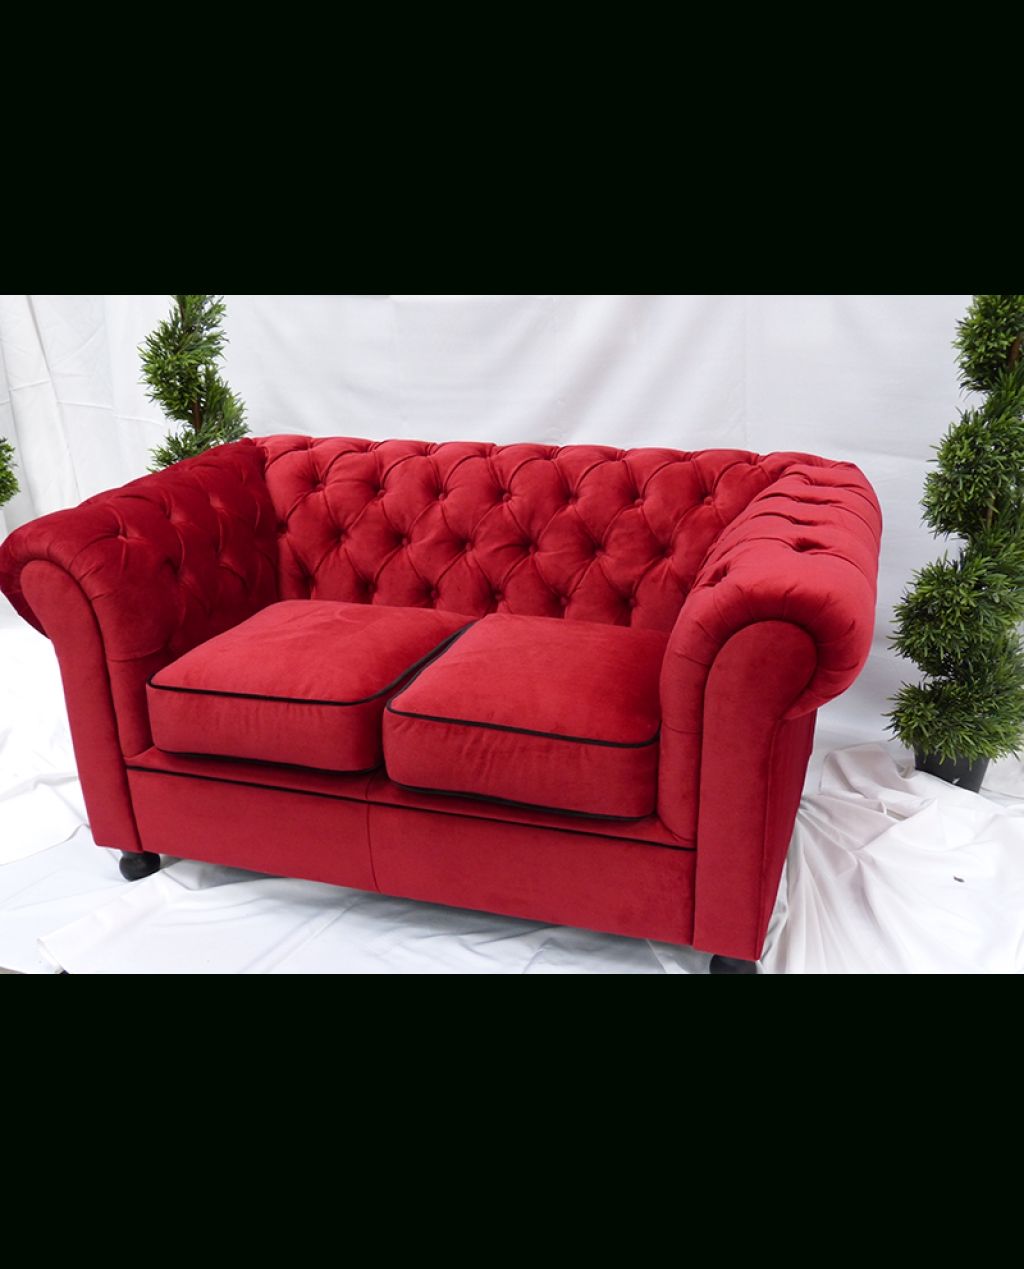 Red Velvet Chesterfield Style 3 Seater Sofa | City Furniture Hire Inside Red Chesterfield Sofas (Photo 13 of 15)